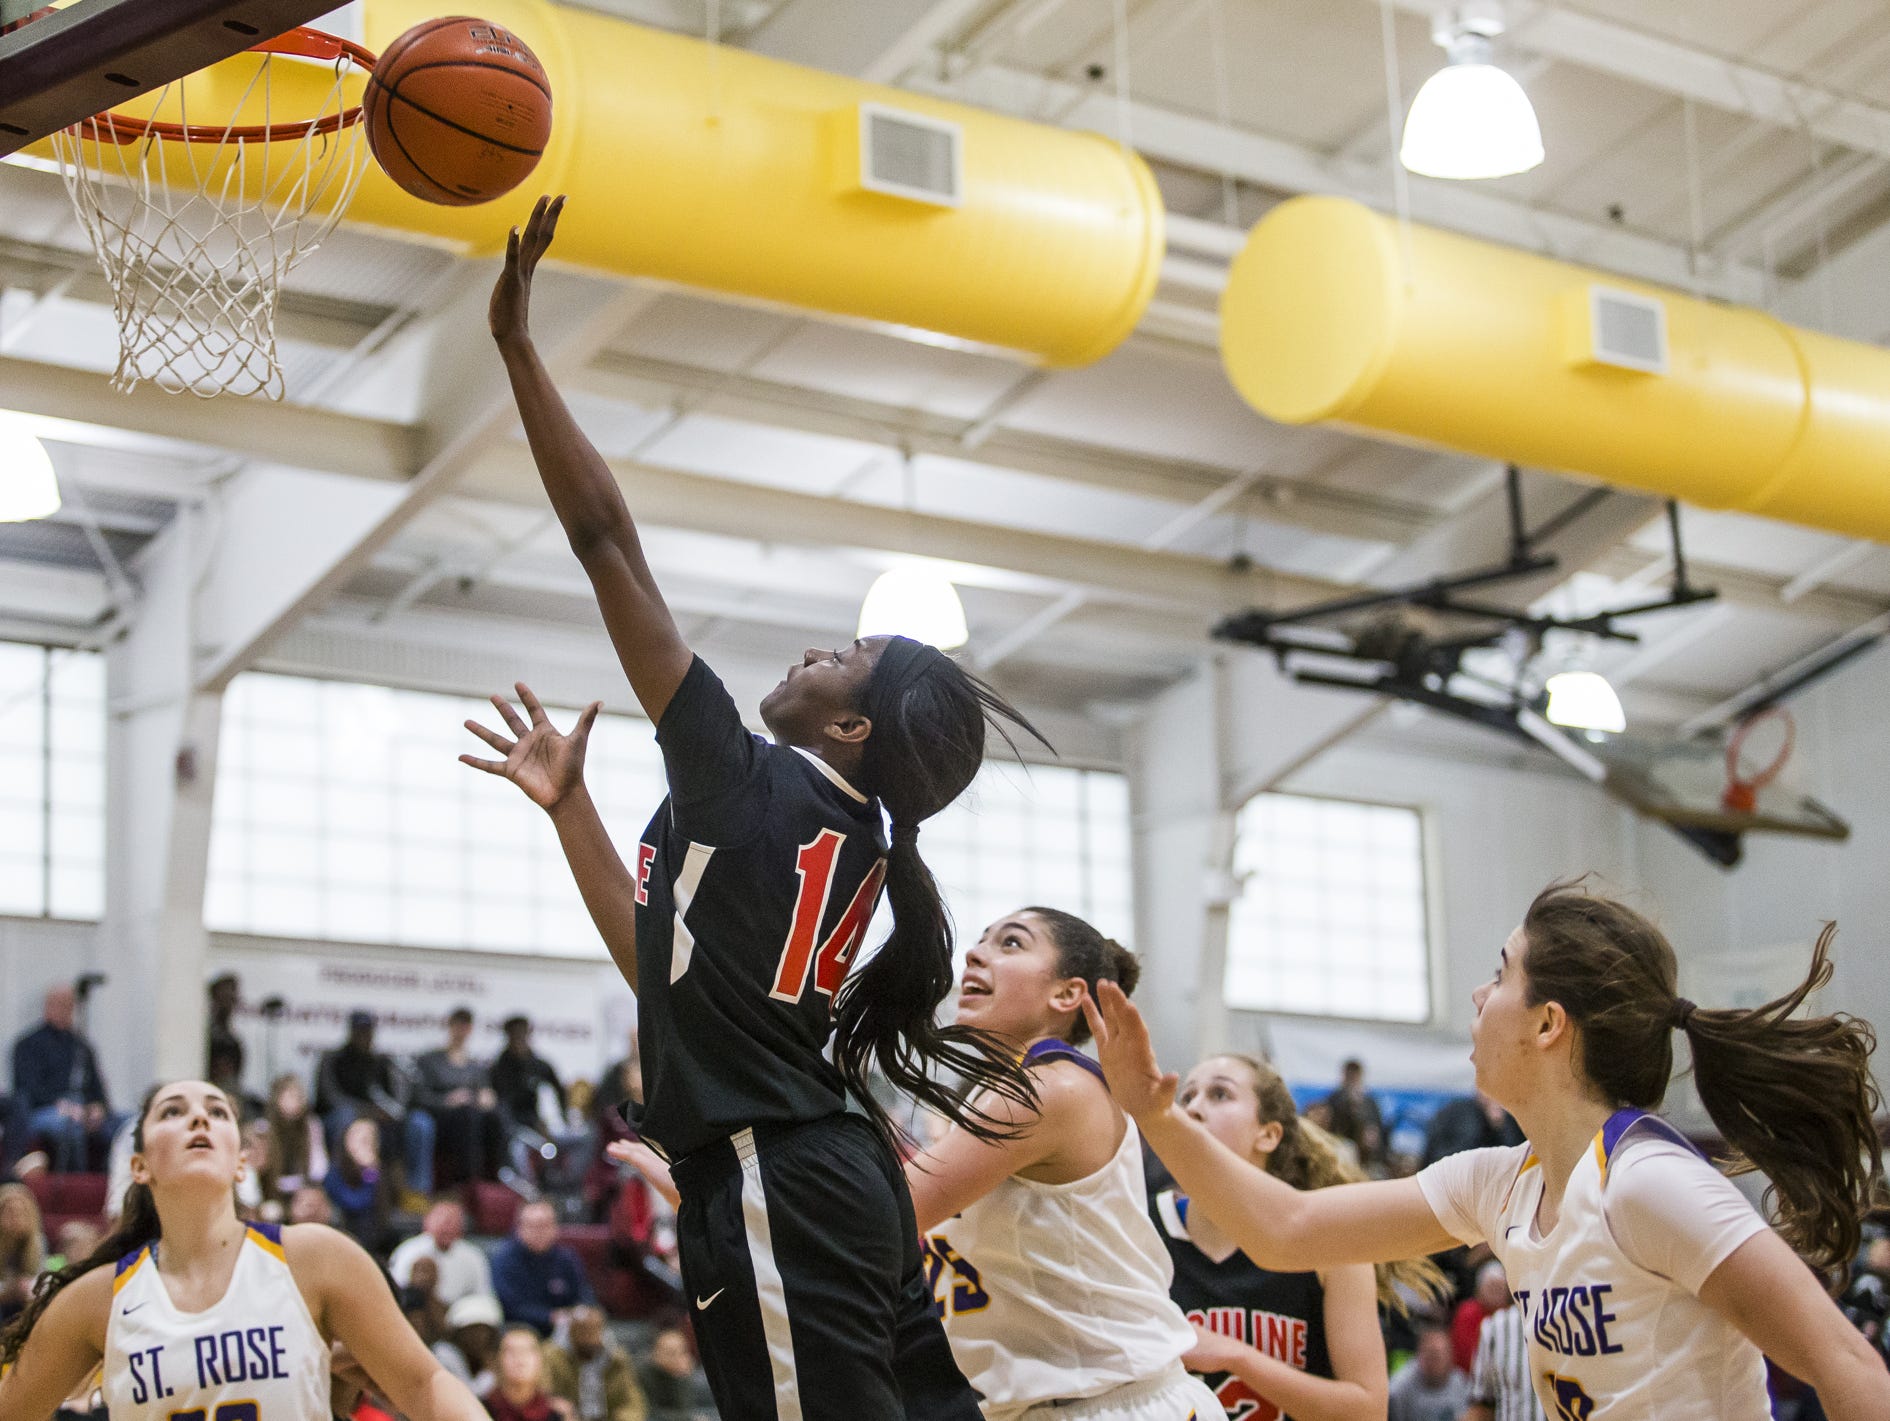 Ursuline's Kryshell Gordy (14) is one of 60 Delaware high school seniors scheduled to play in the Blue-Gold All-Star basketball games on March 18,